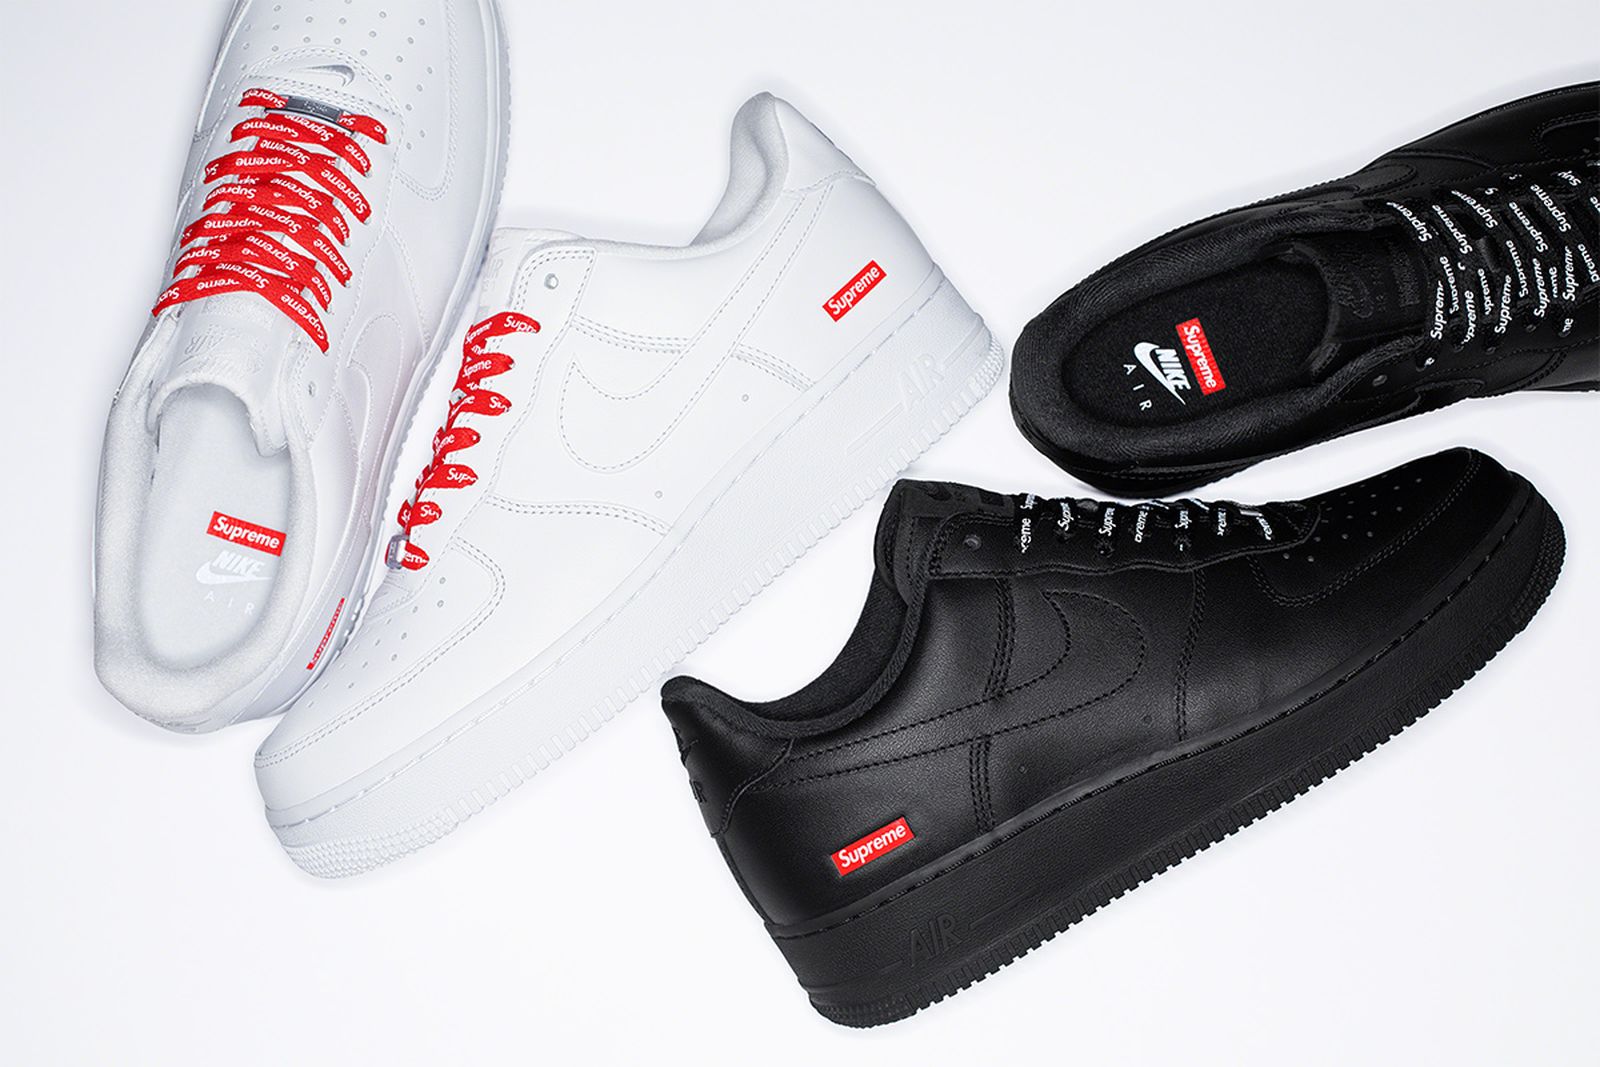 Supreme x Nike Air Force 1 Low Will Restock, Don't Freak Out فور ايفر ملتي ماكا